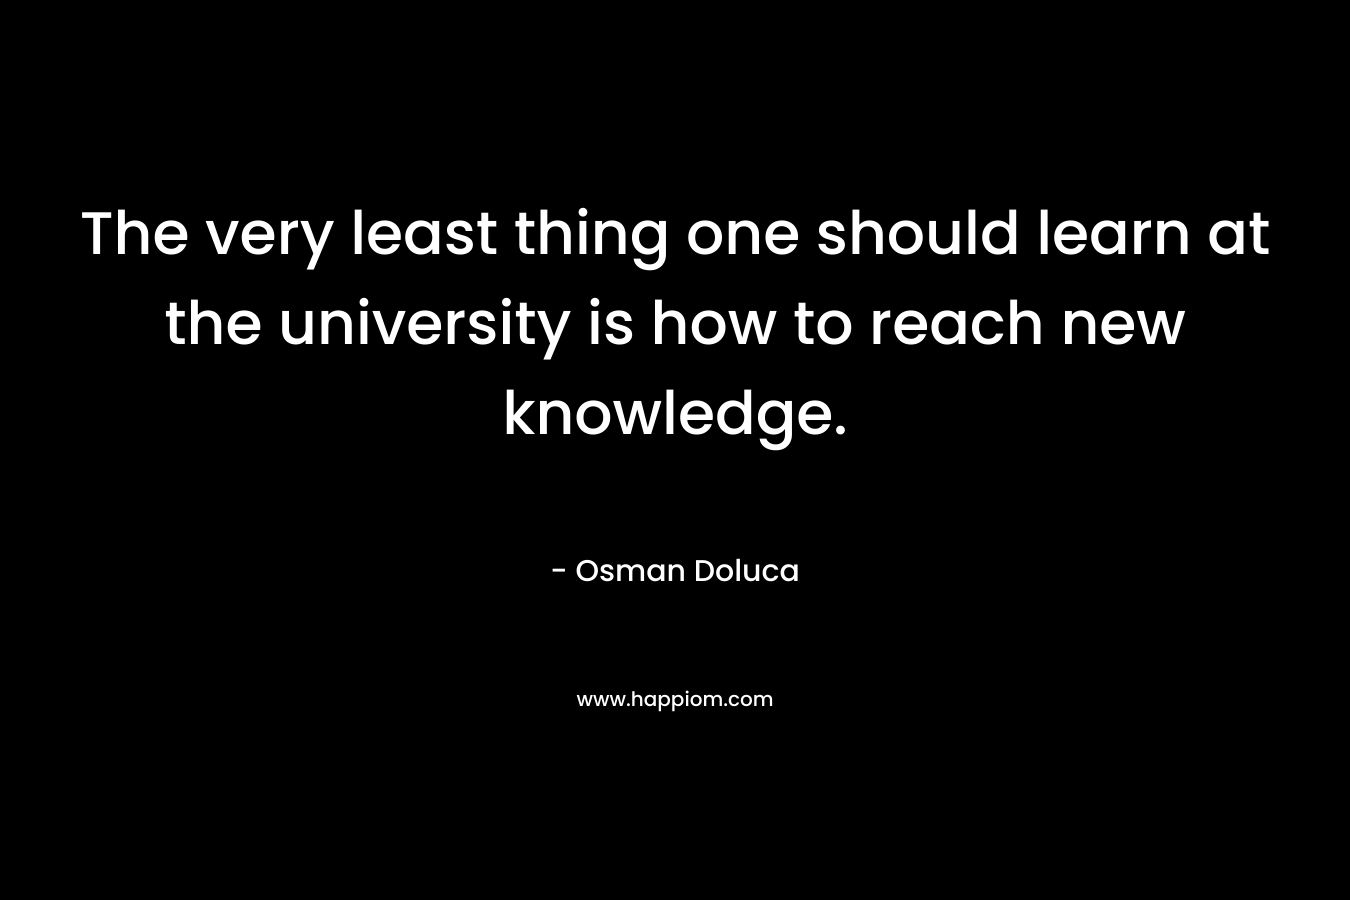 The very least thing one should learn at the university is how to reach new knowledge. – Osman Doluca